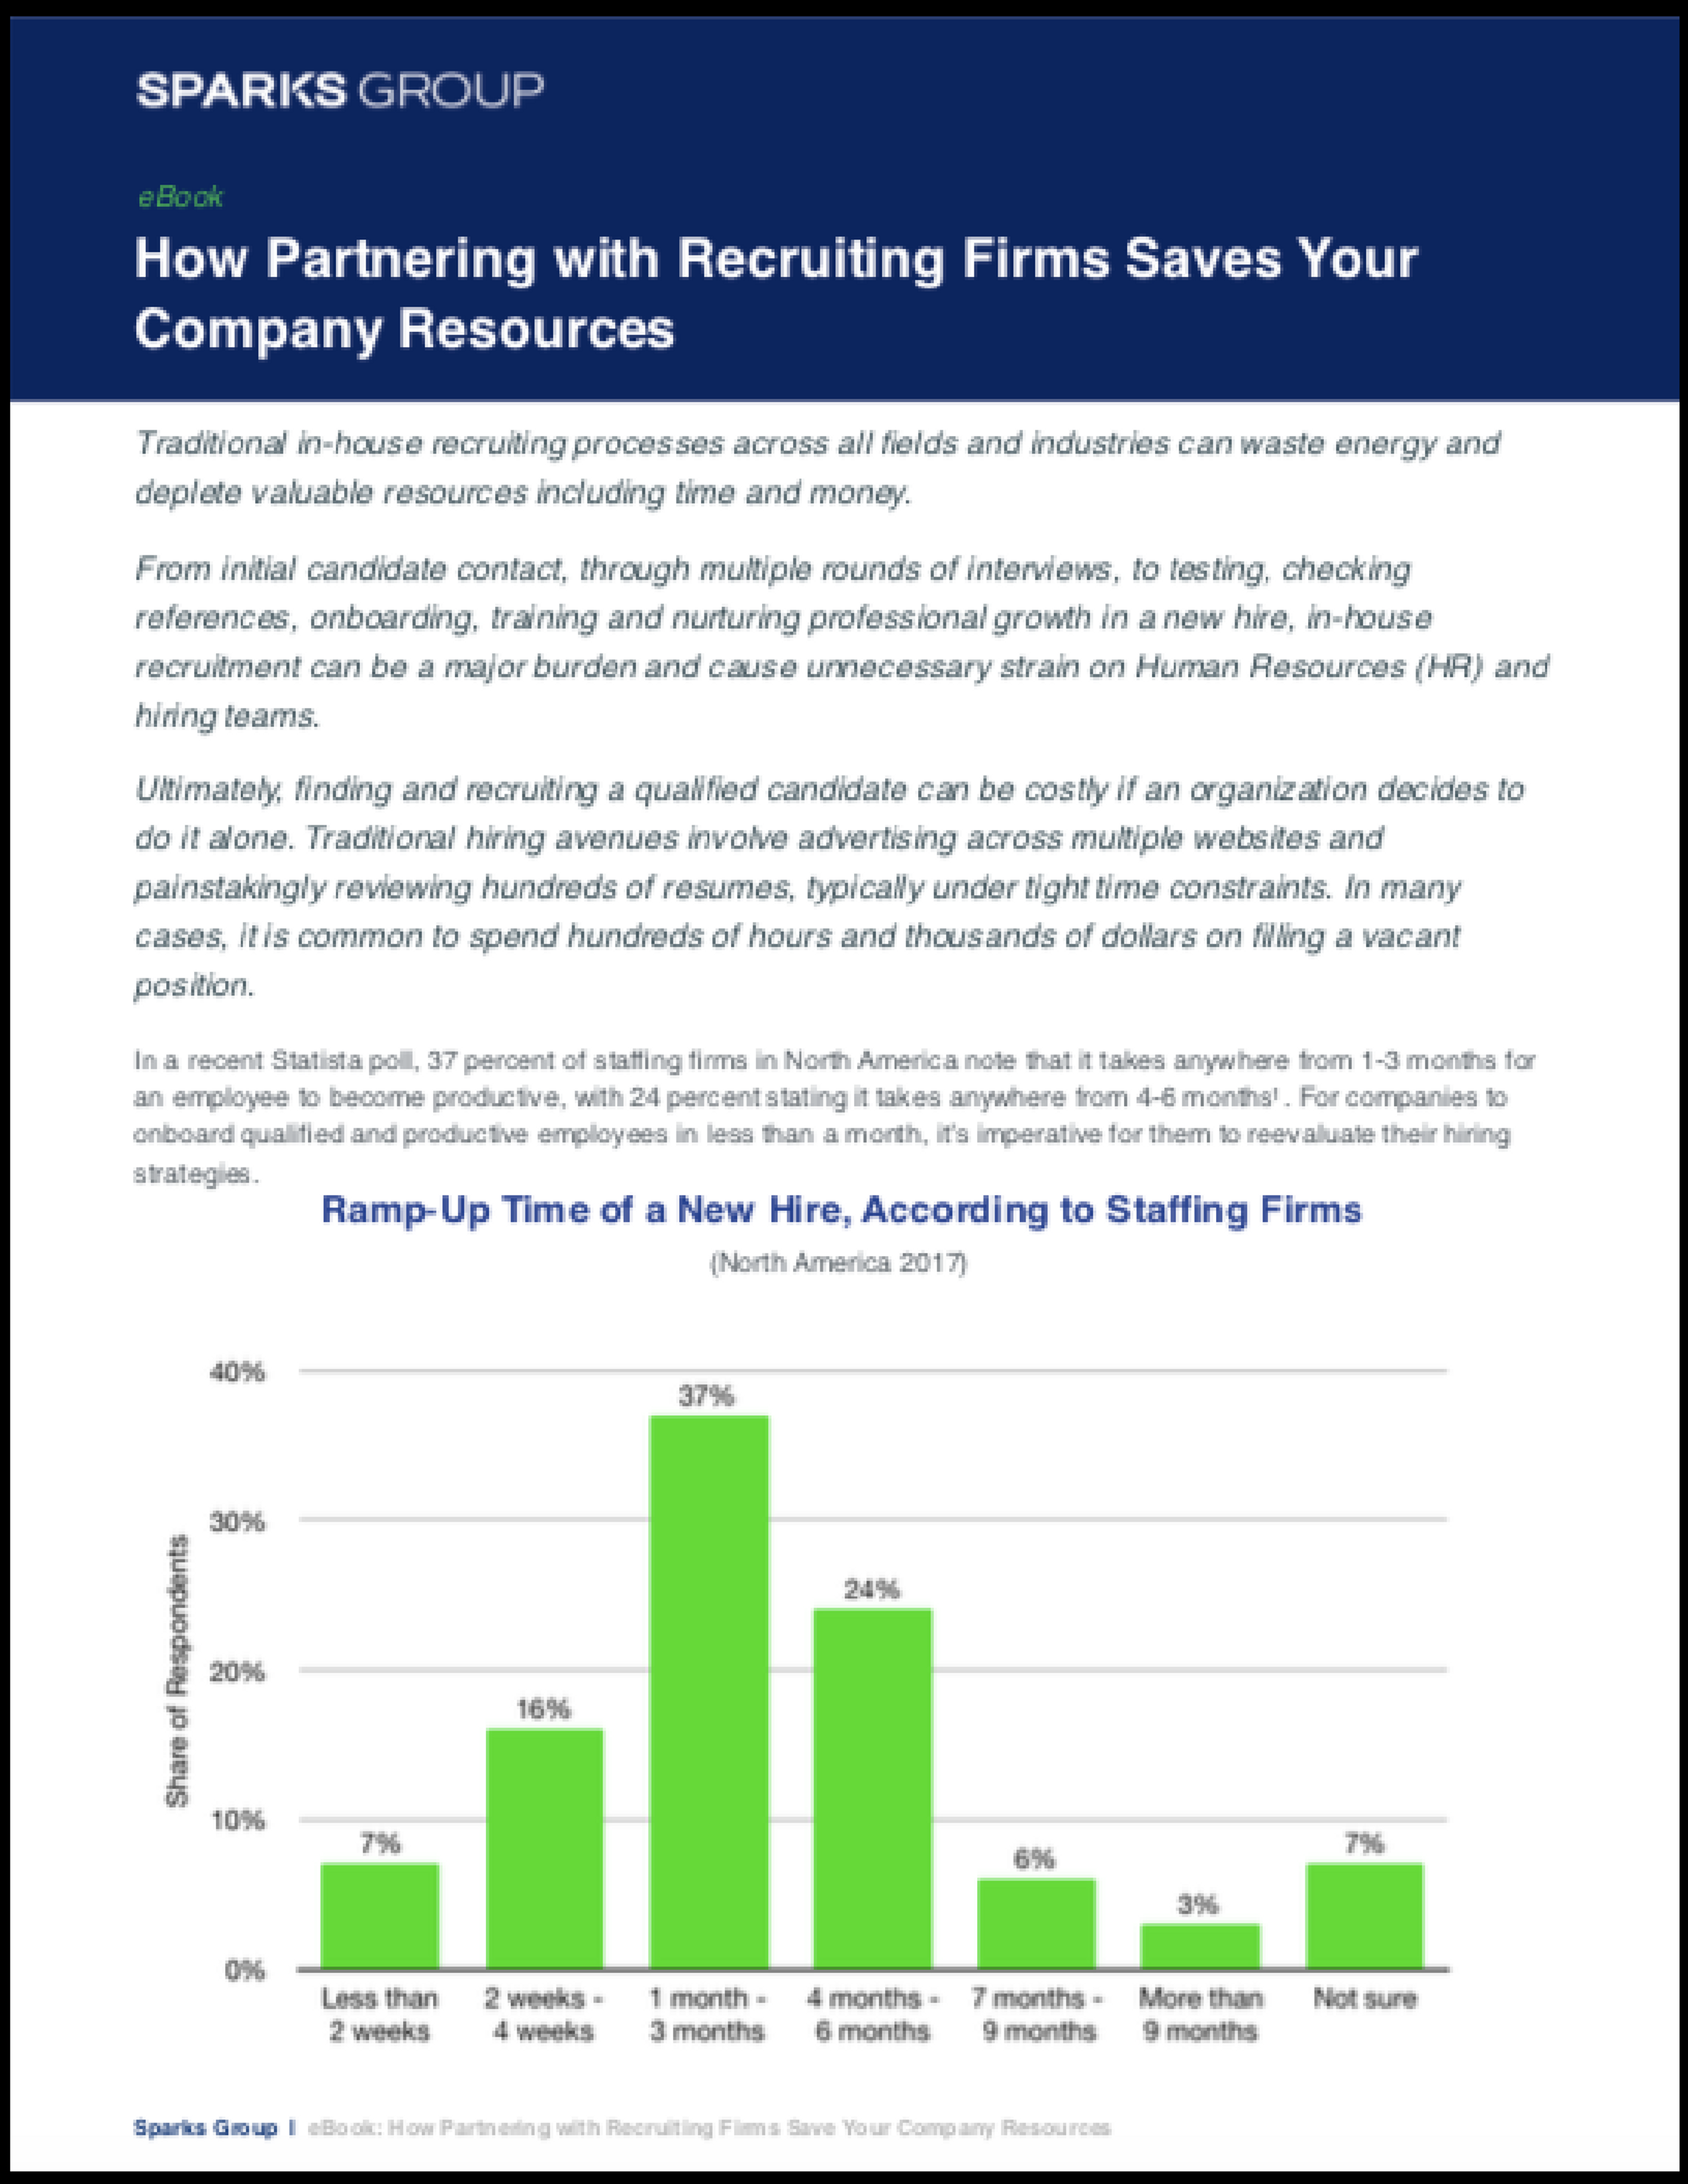 How Partnering with Recruiting Firms Saves Your Company Resources